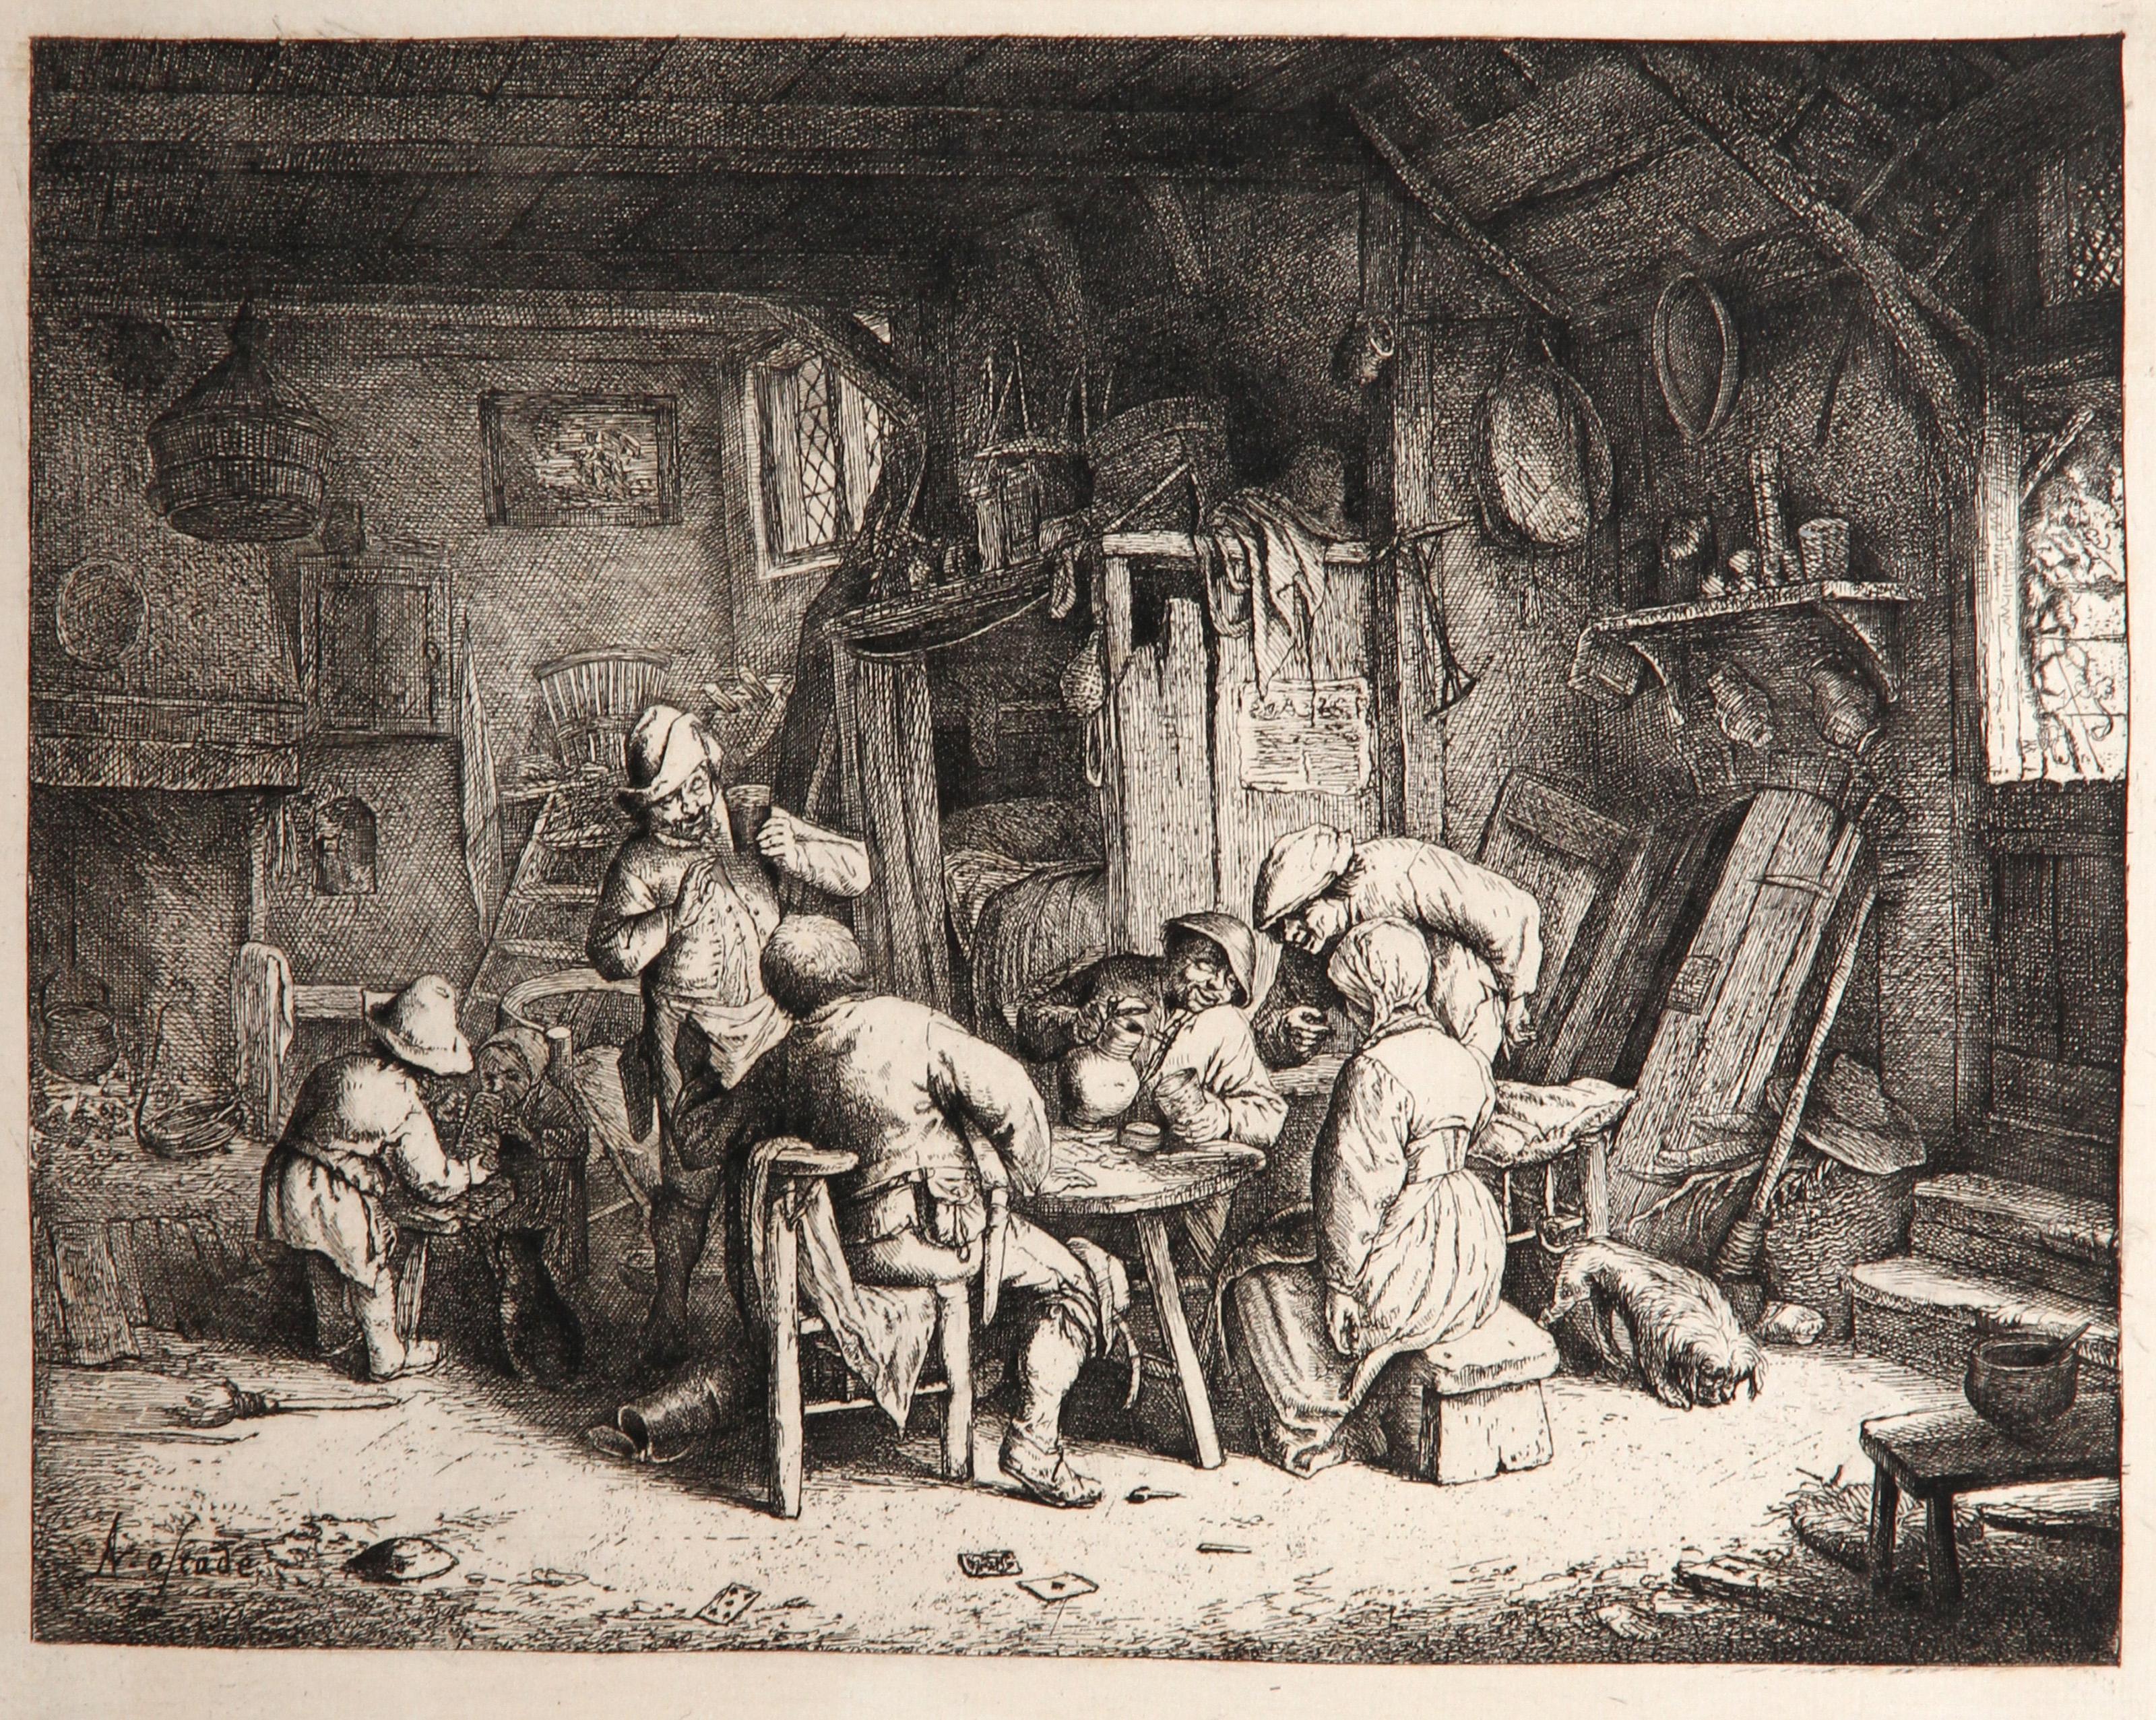 Artist: Adriaen van Ostade, After by Amand Durand, Dutch (1610 - 1685) - Le Goute, Year: 1875, Medium: Heliogravure, Image Size: 7.5 x 9.75 inches, Size: 8.5  x 10.25 in. (21.59  x 26.04 cm), Printer: Amand Durand, Description: French Engraver and